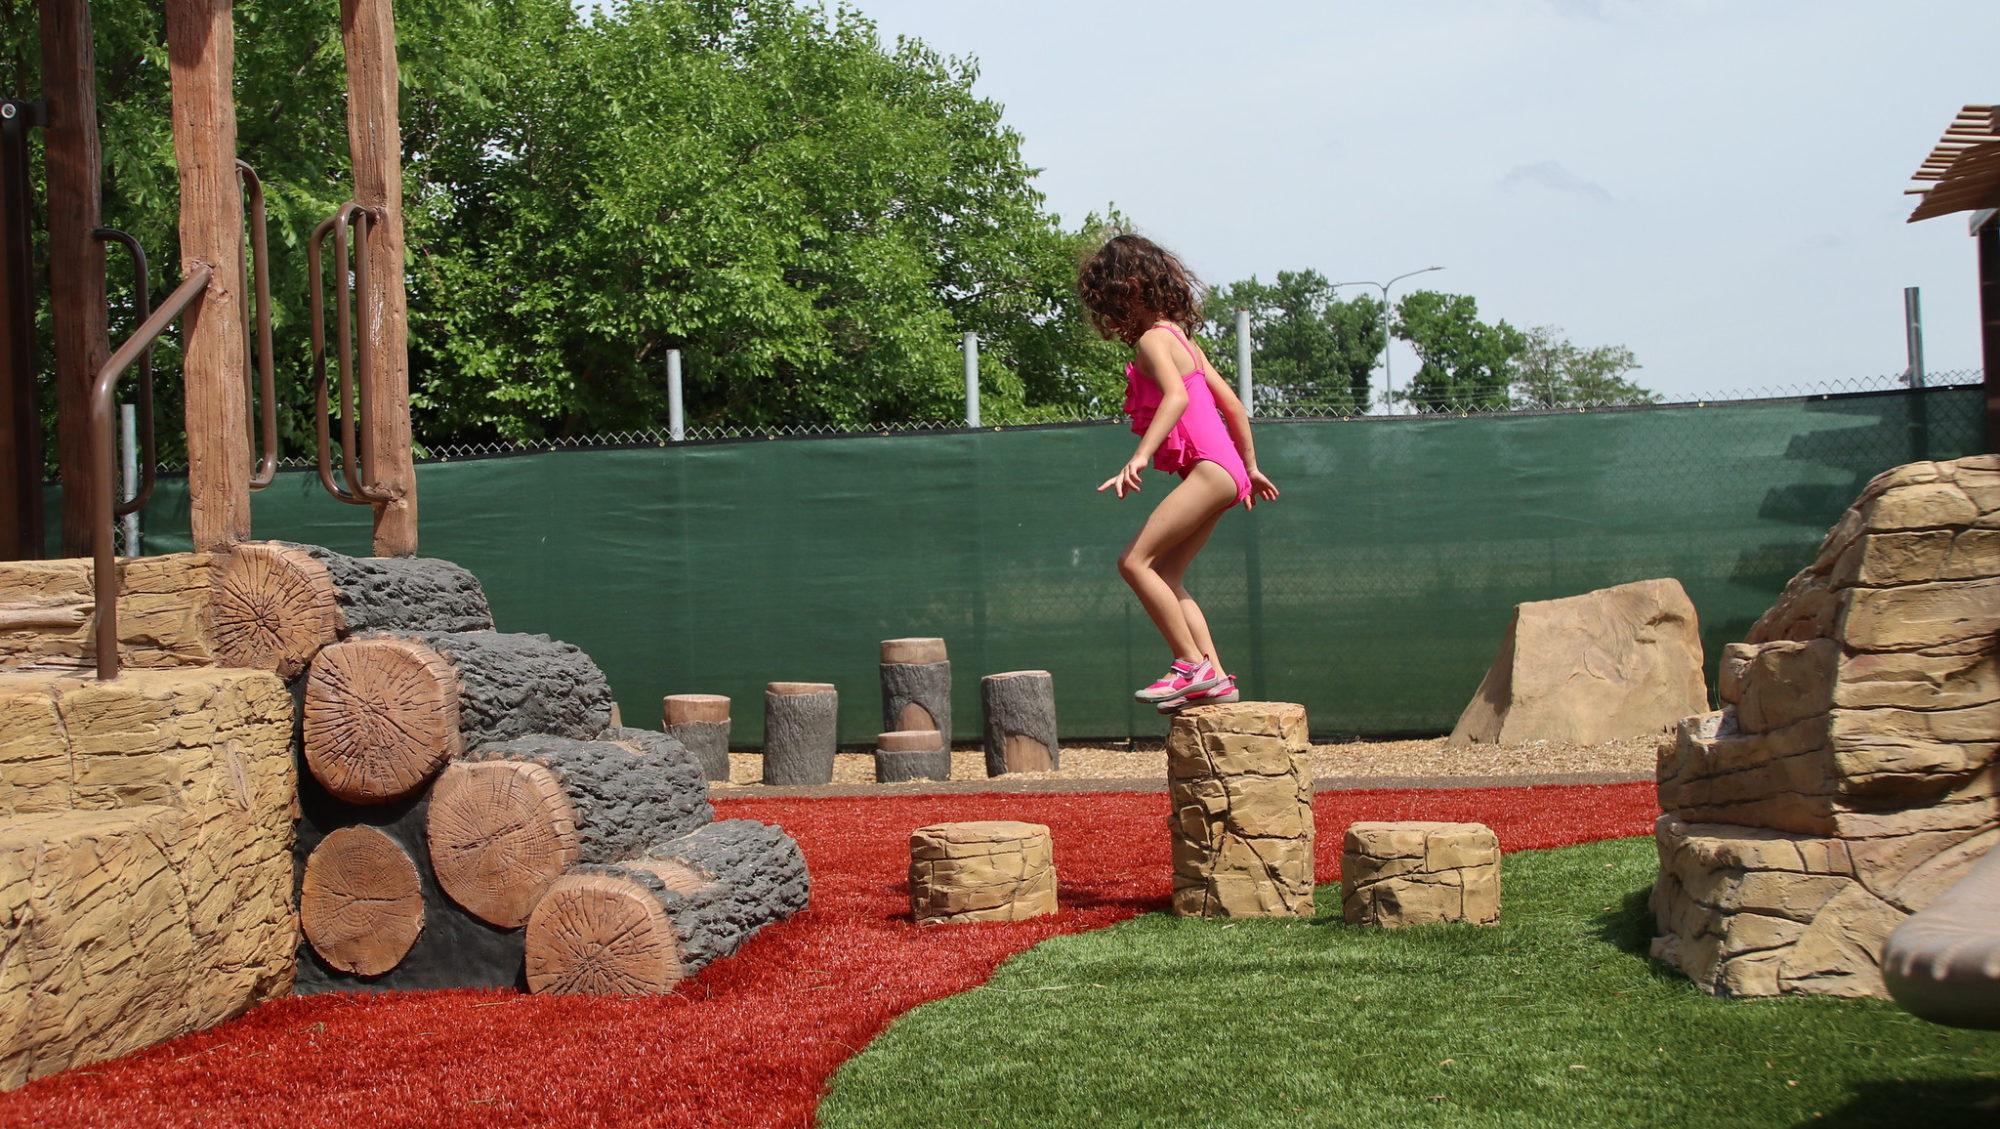 Playground stone steppers